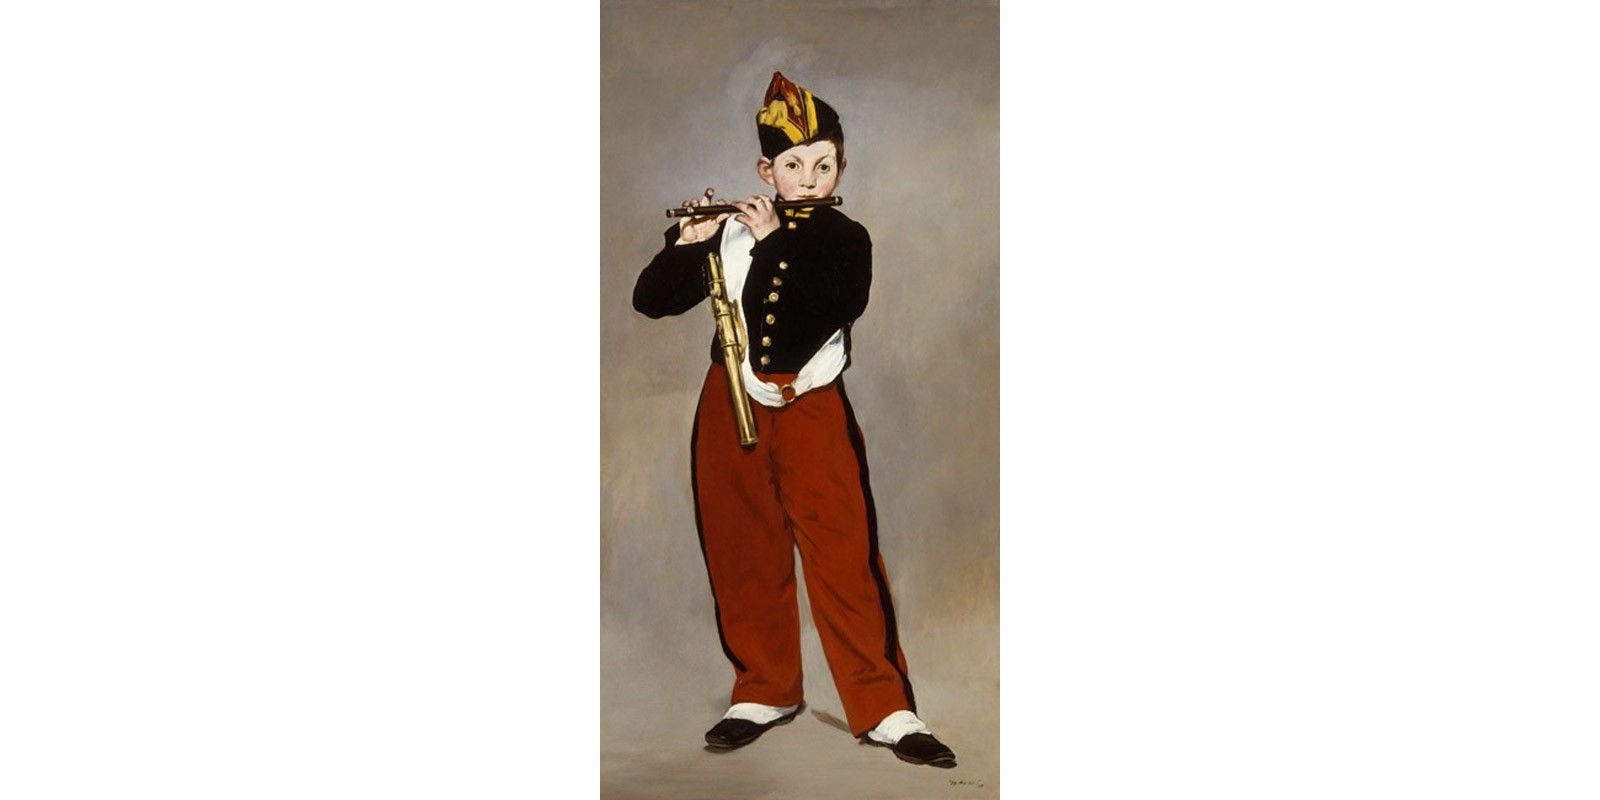 Edouard Manet - The Young Flautist